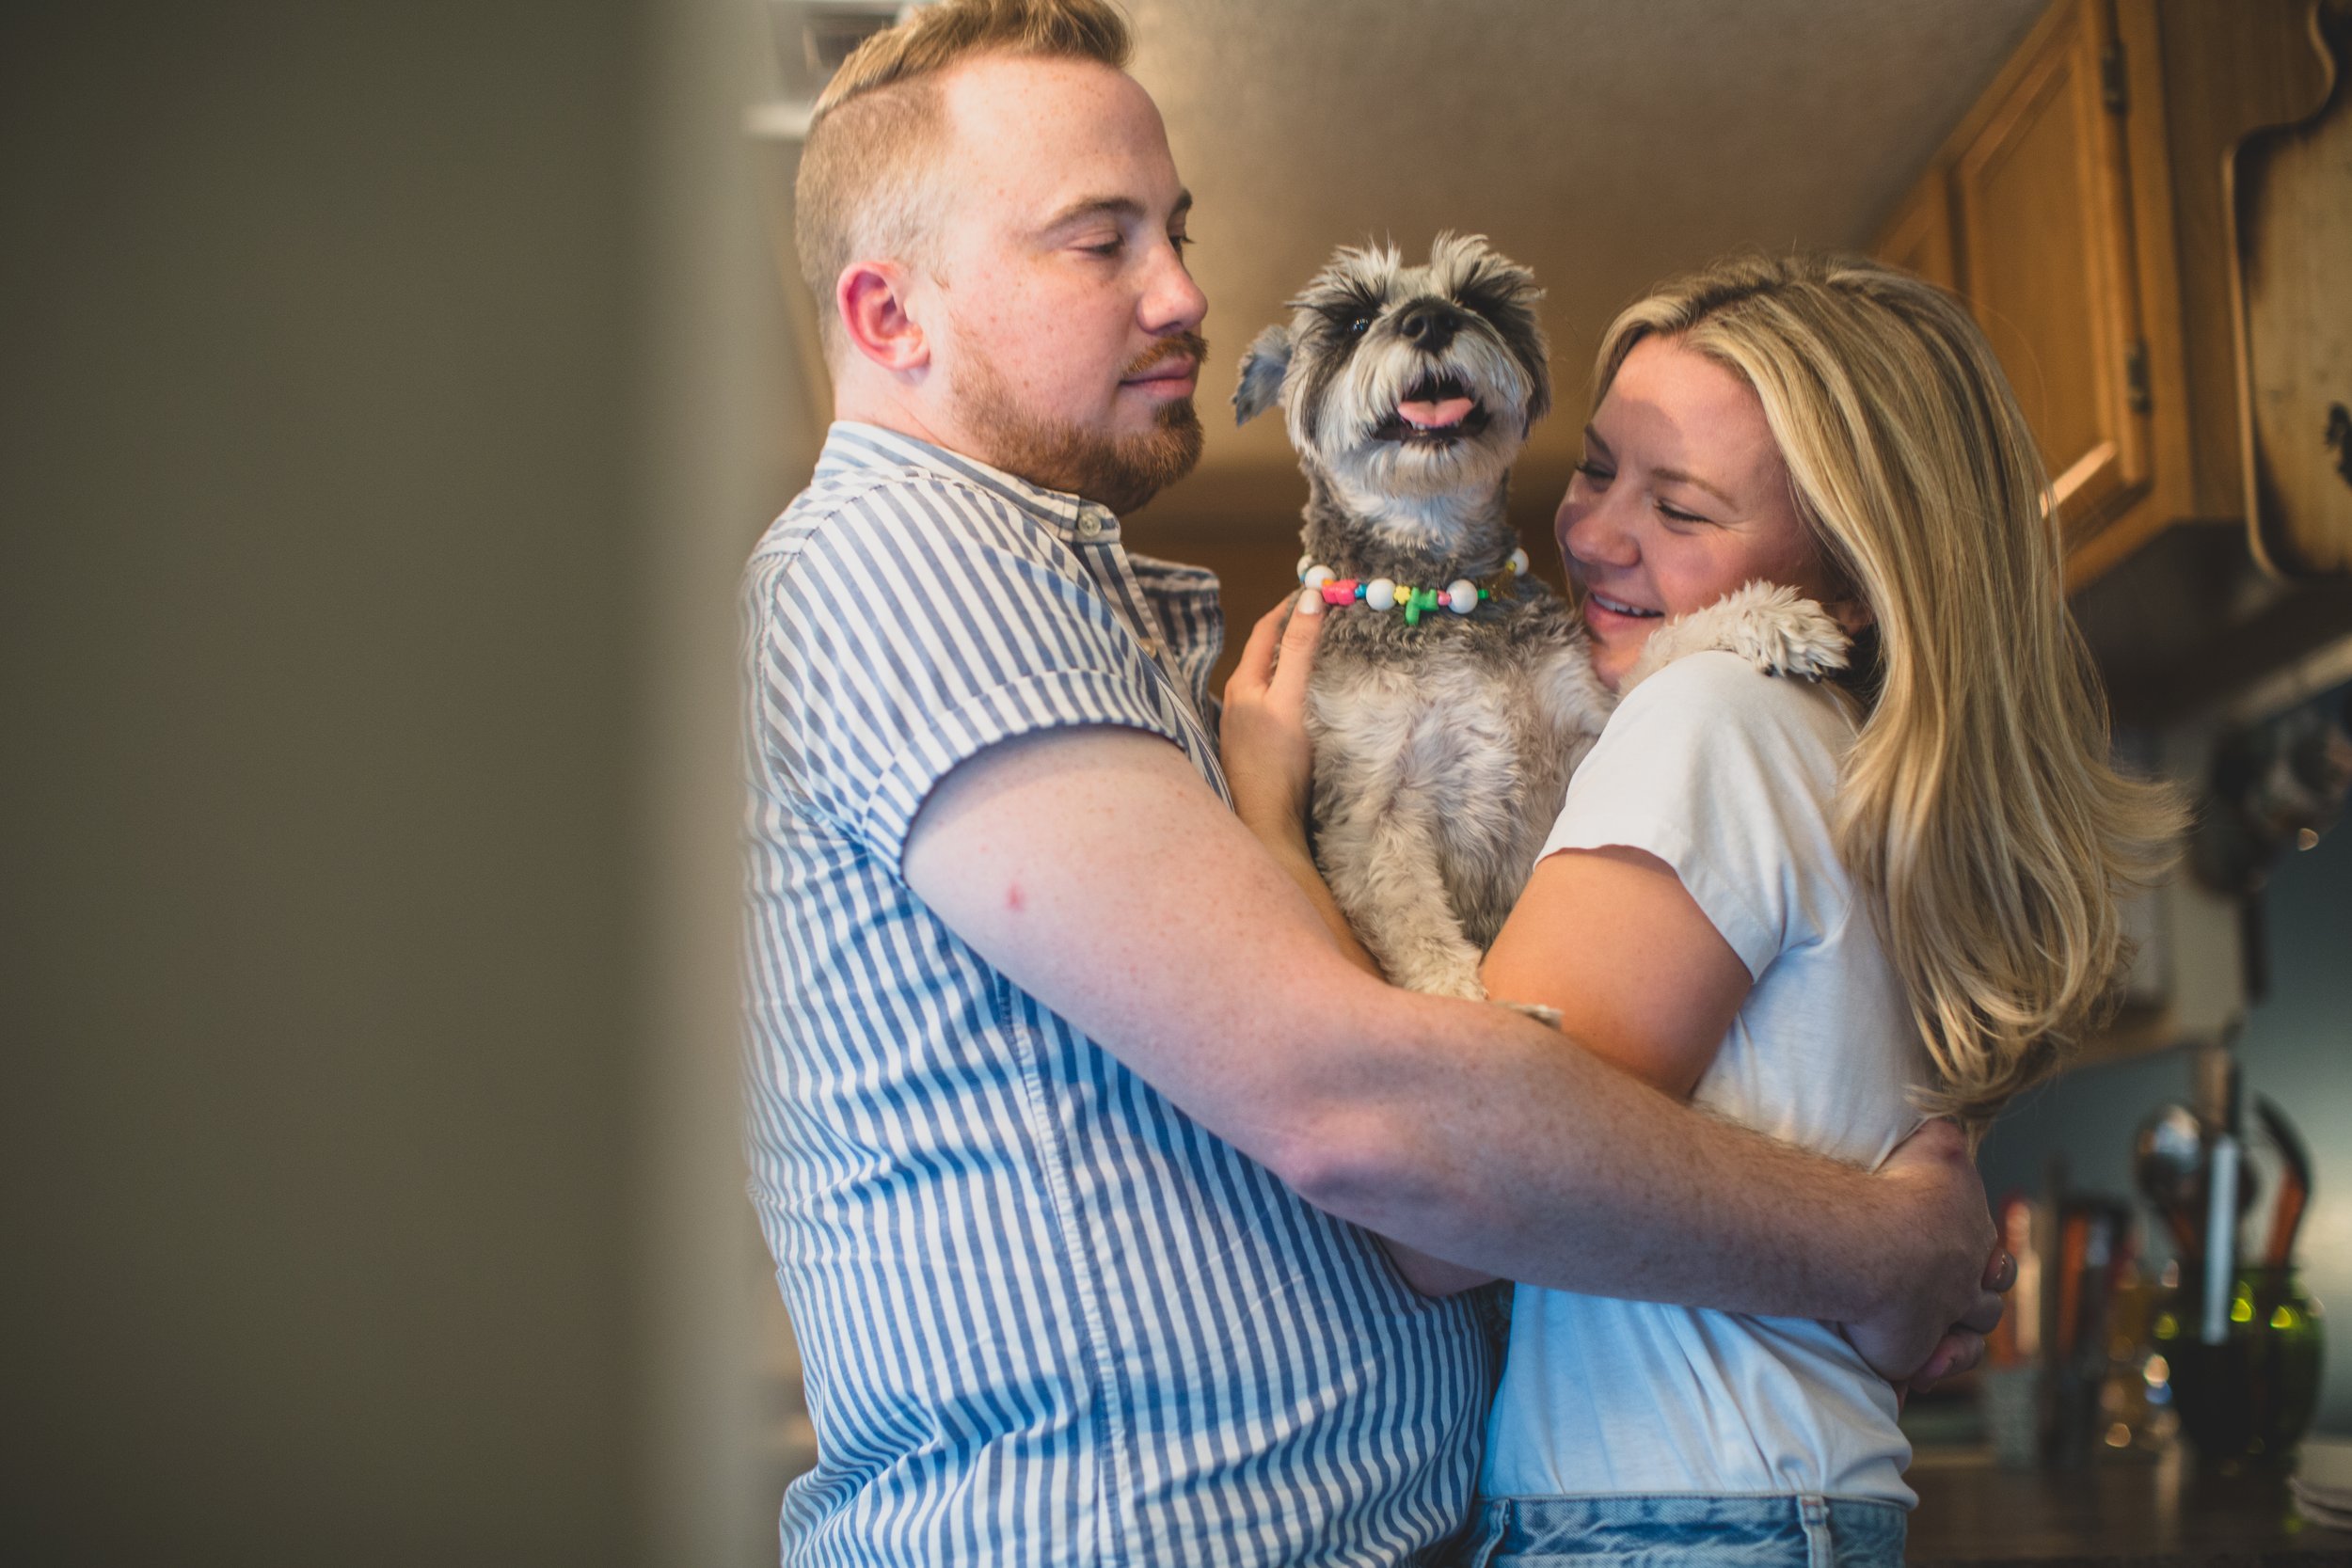 Couple have fun together during their in-home engagement photo session with Phoenix based romantic and creative wedding photographer; Jennifer Lind Schutsky. 